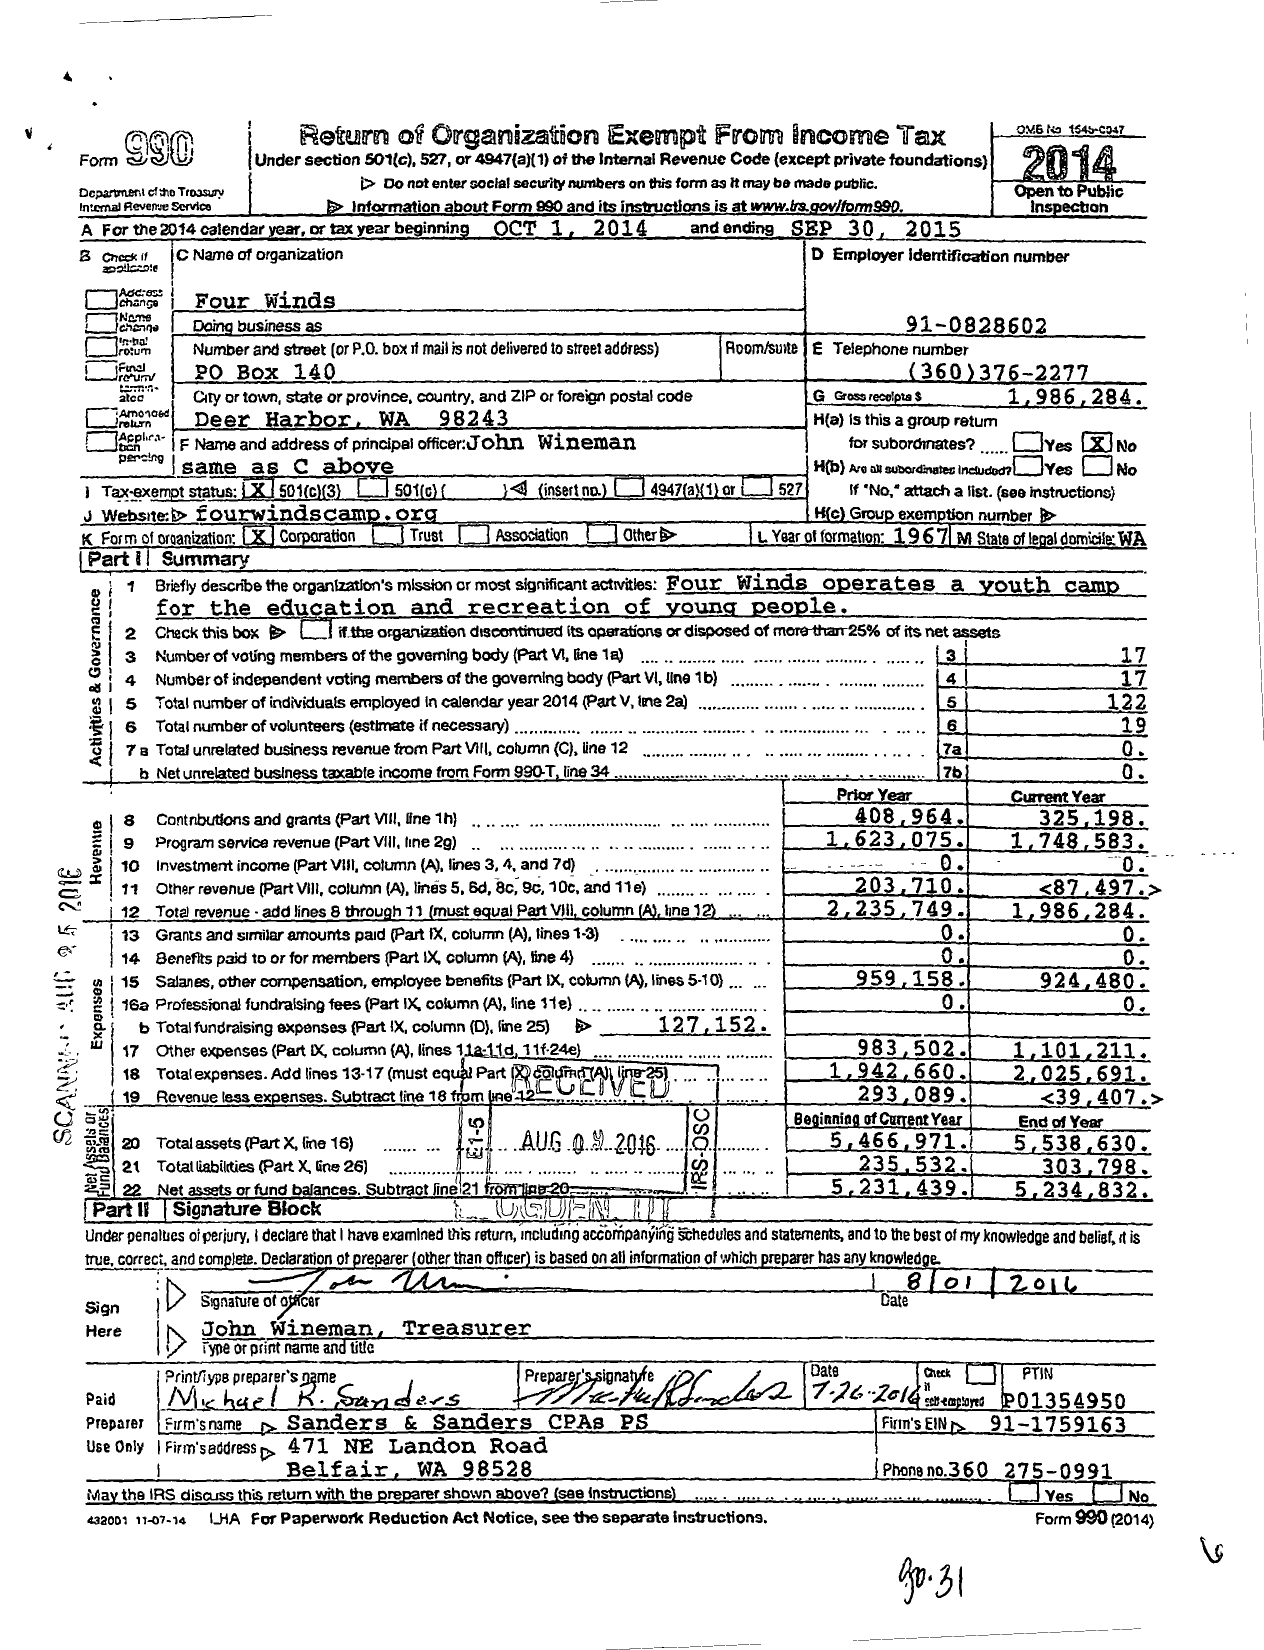 Image of first page of 2014 Form 990 for Four Winds